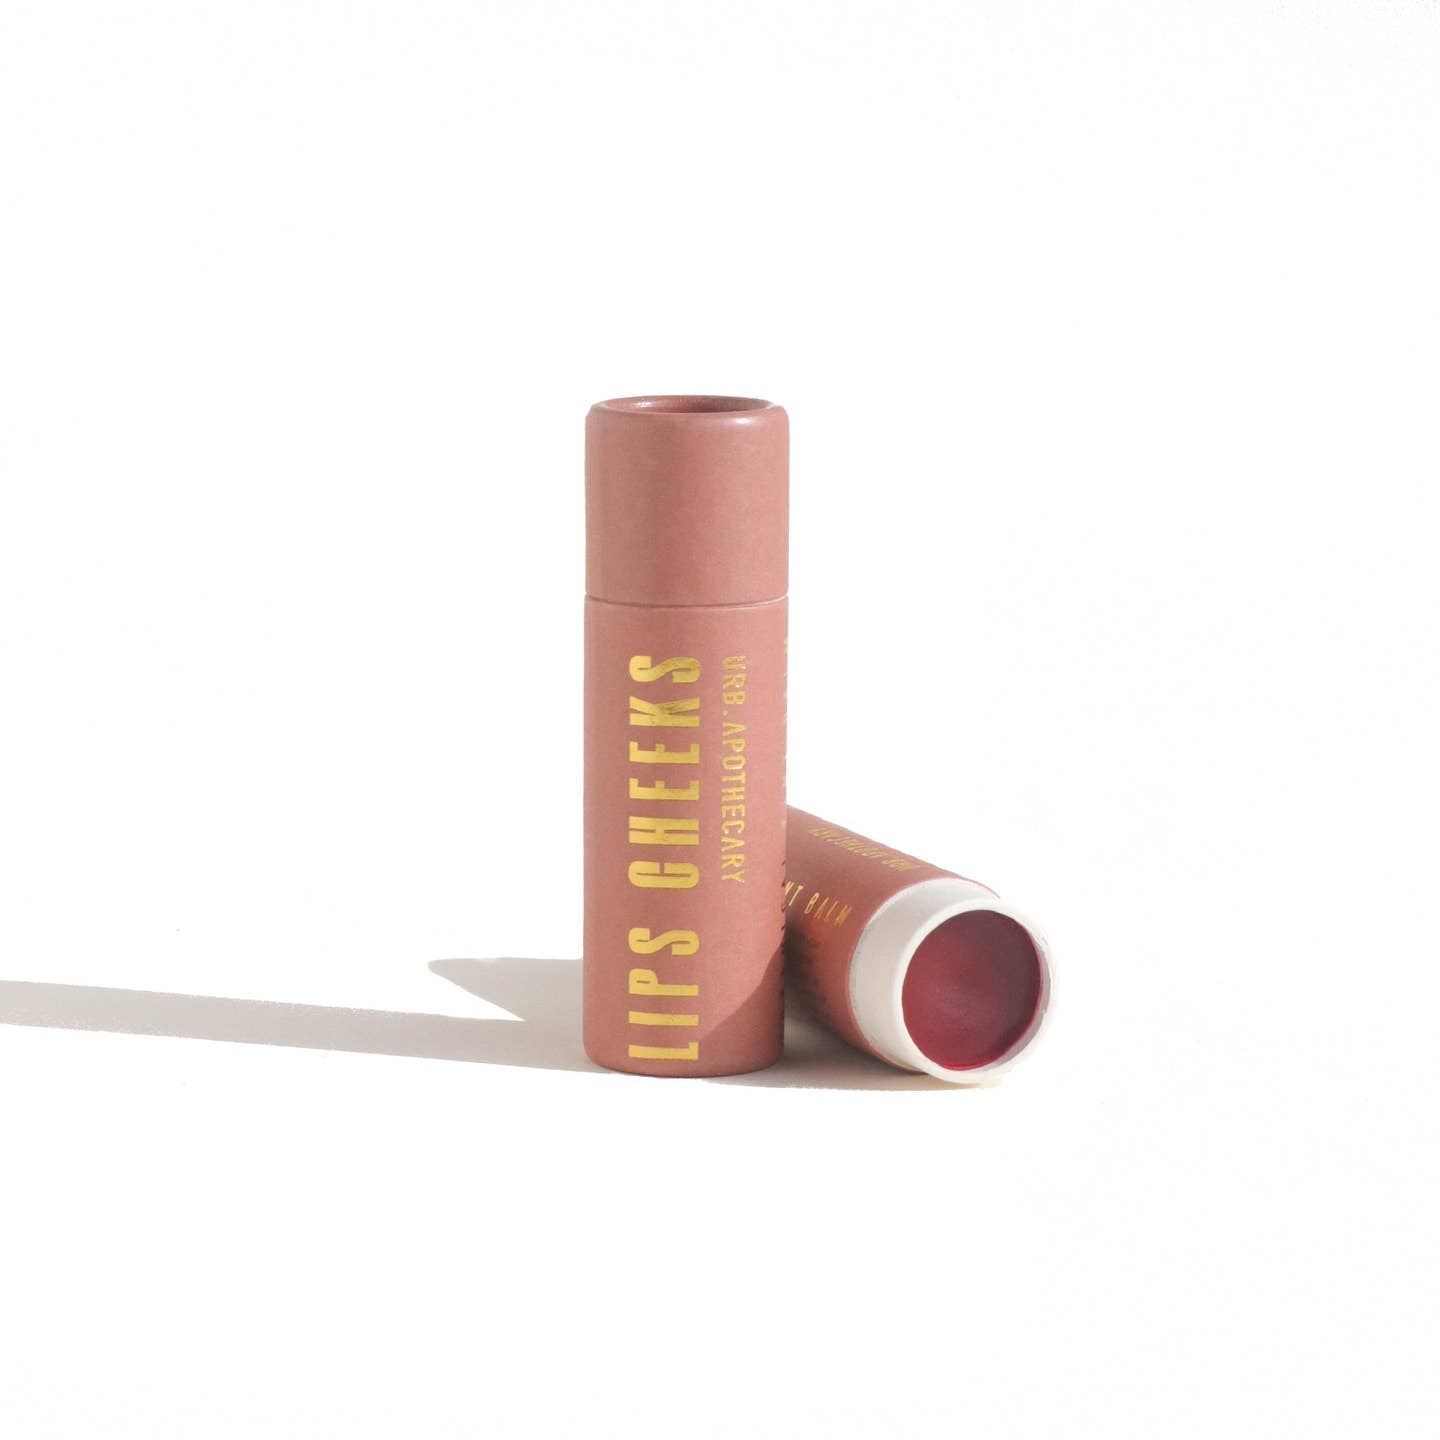 URB_Apothecary_Lips_and_Cheeks_non_toxic_moisturizing_tinted_balm